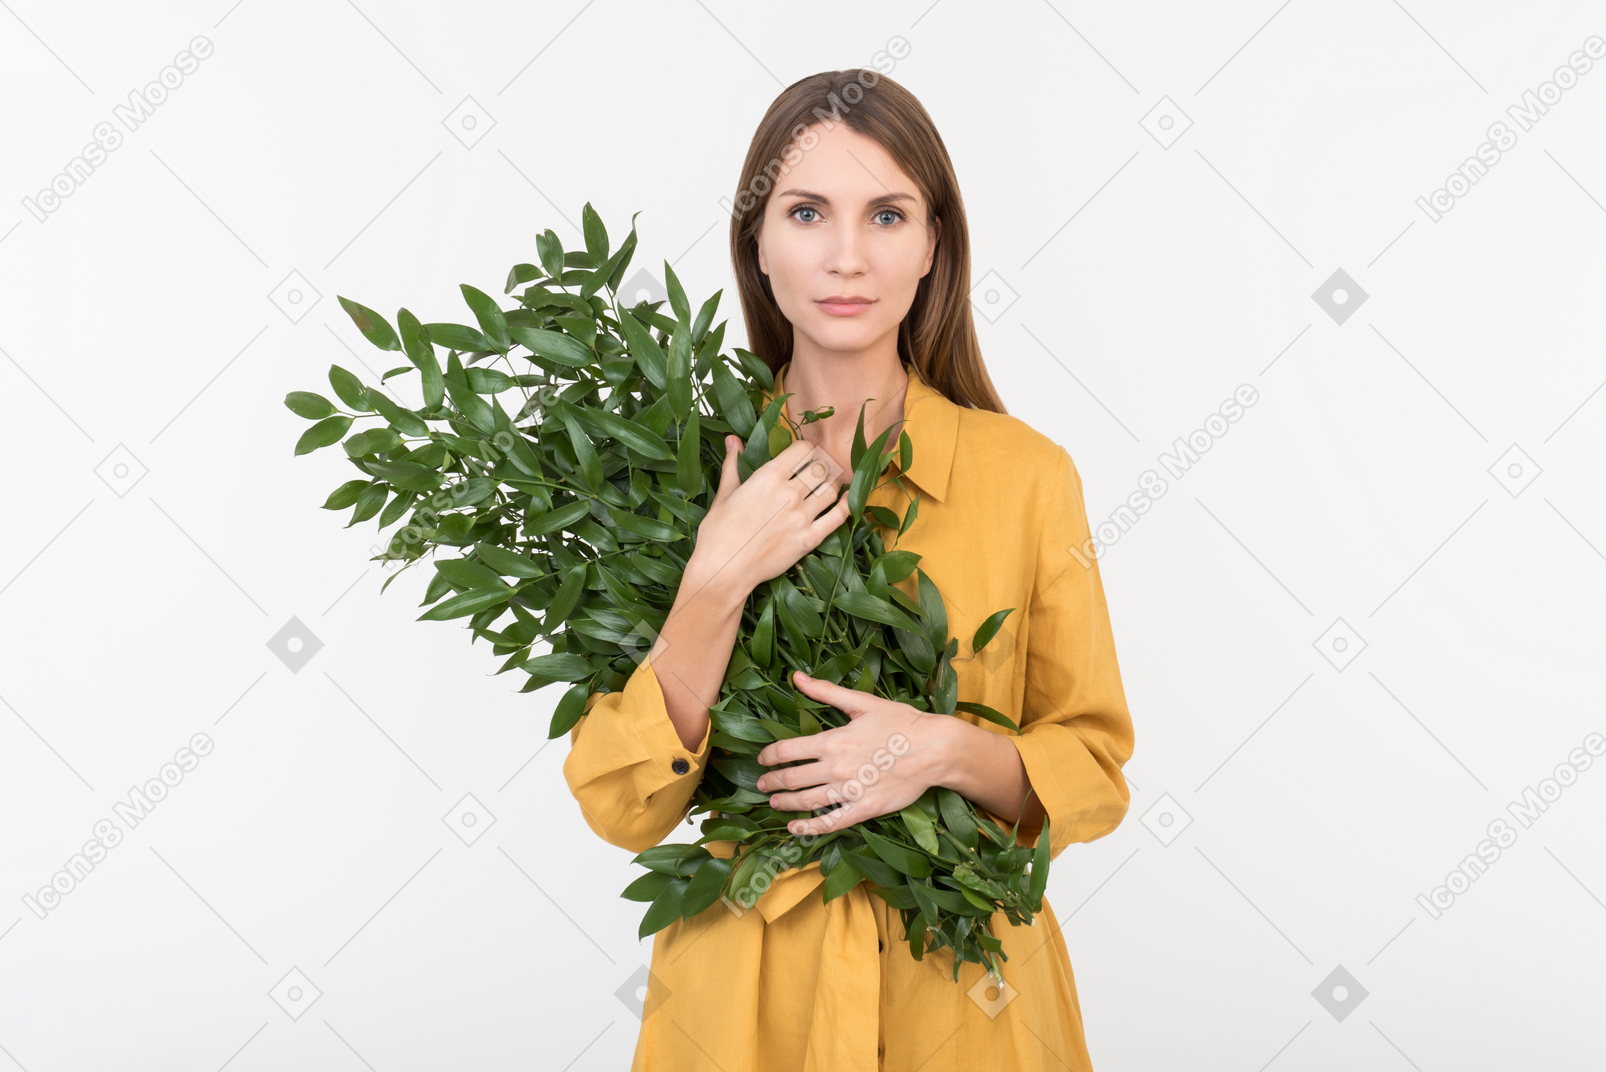 Young woman holding bouquet of green branches